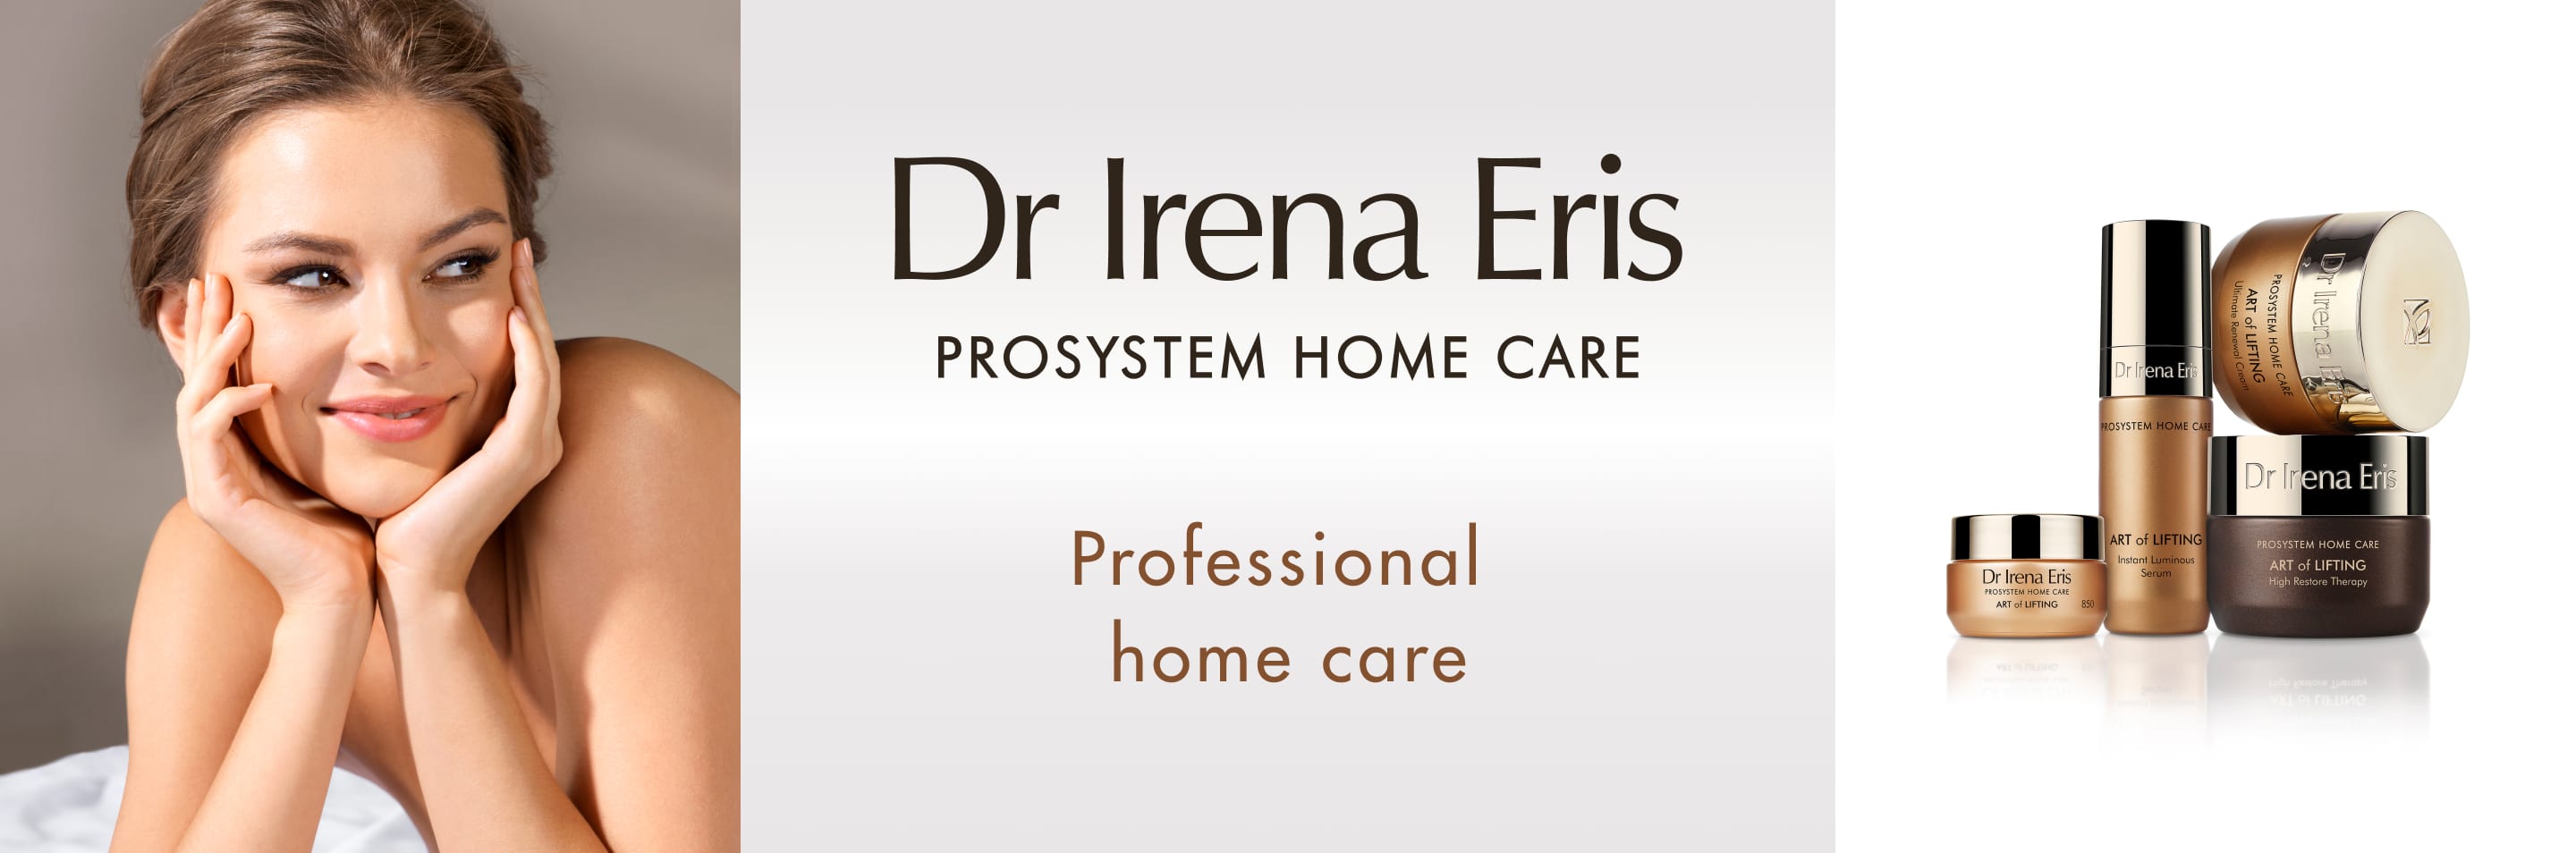 professional-home-care